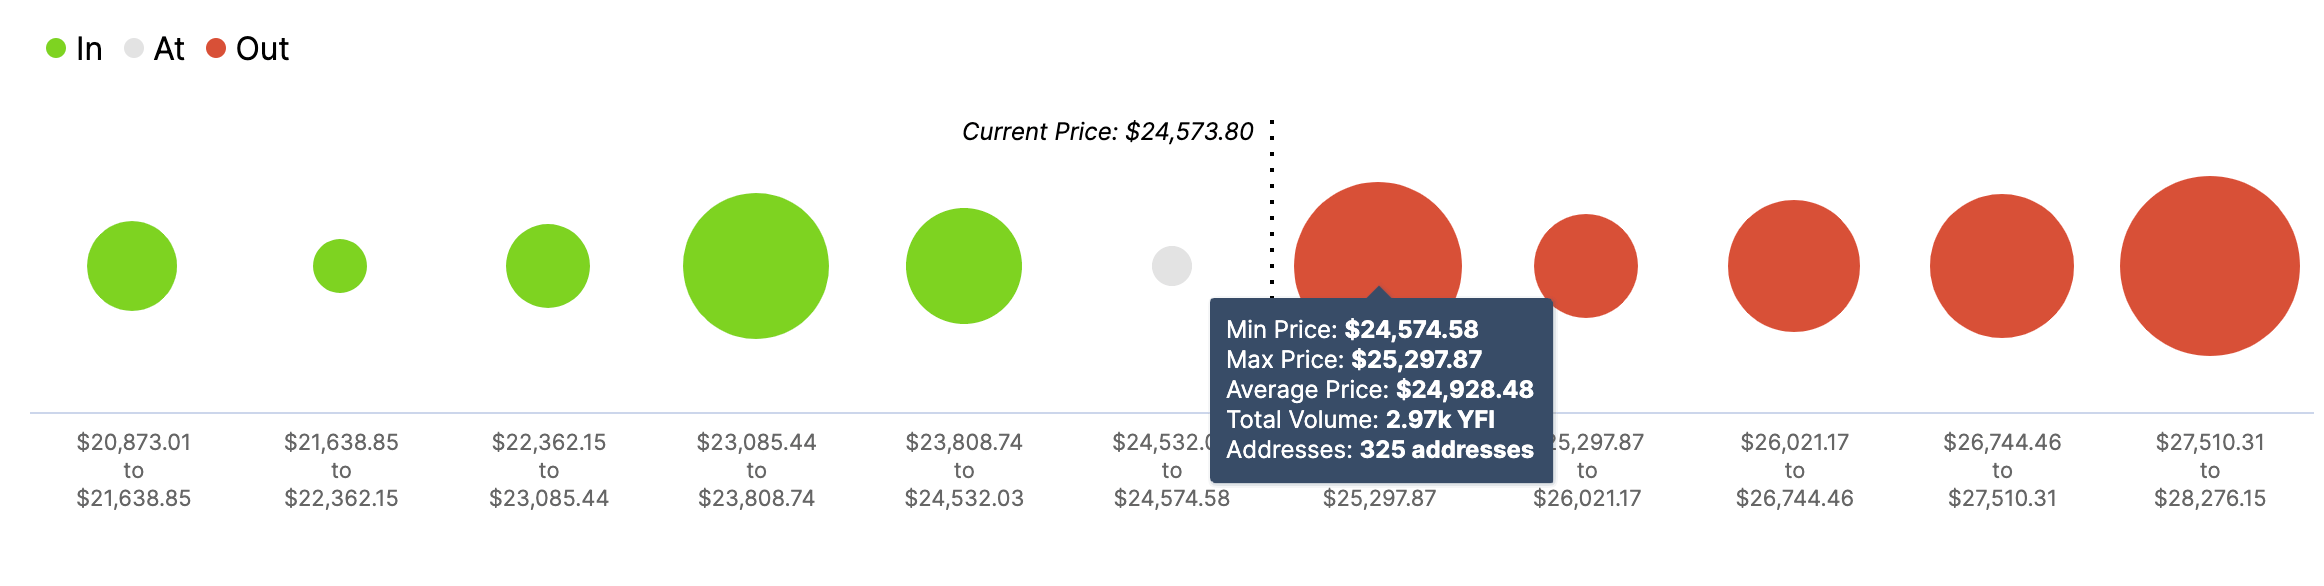 YFI In/Out of the Money Around Price